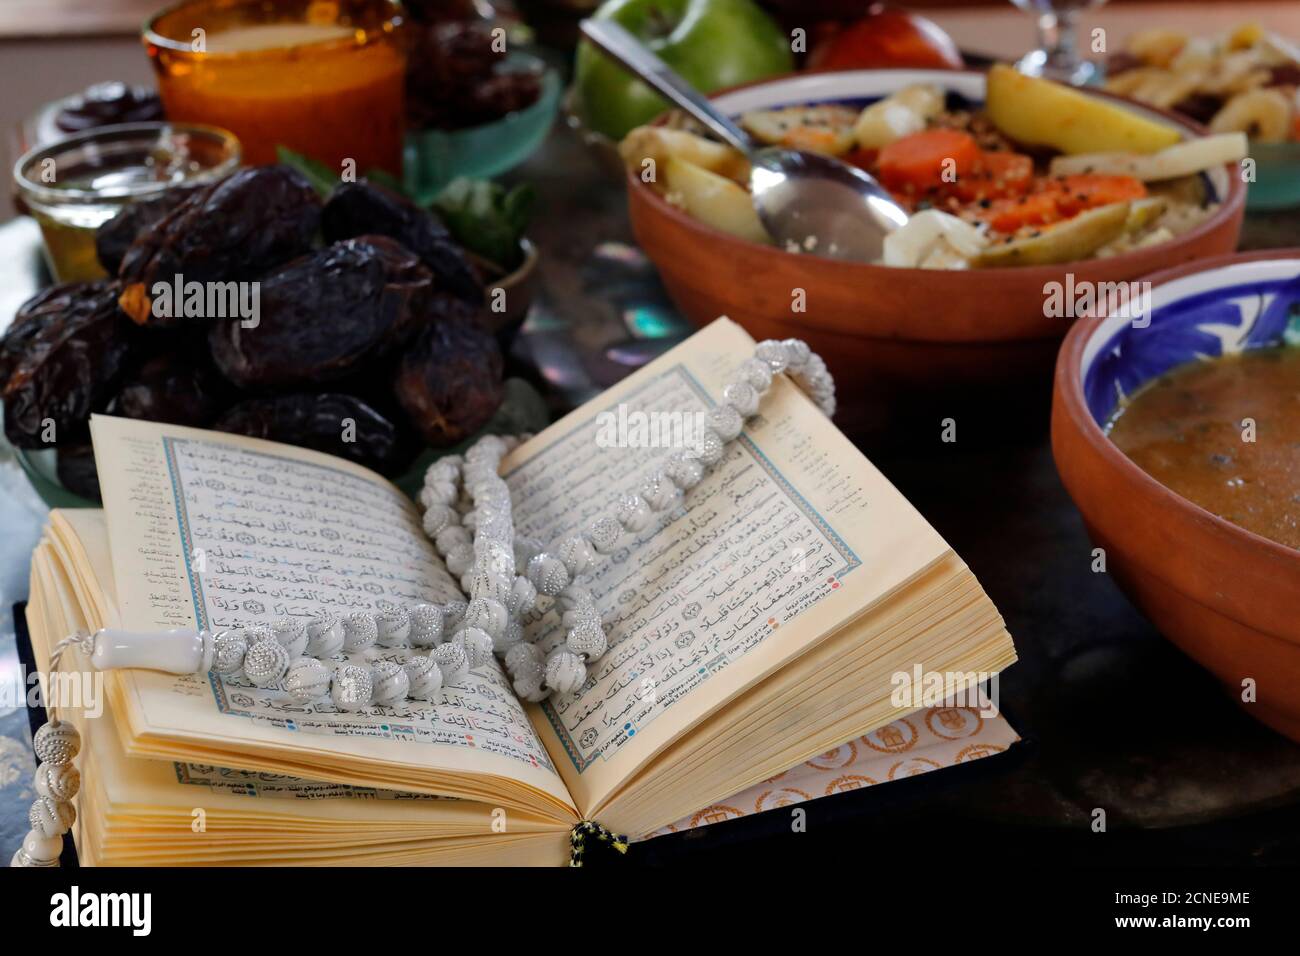 Traditional meal for iftar in time of Ramadan after the fast has been broken, France, Europe Stock Photo